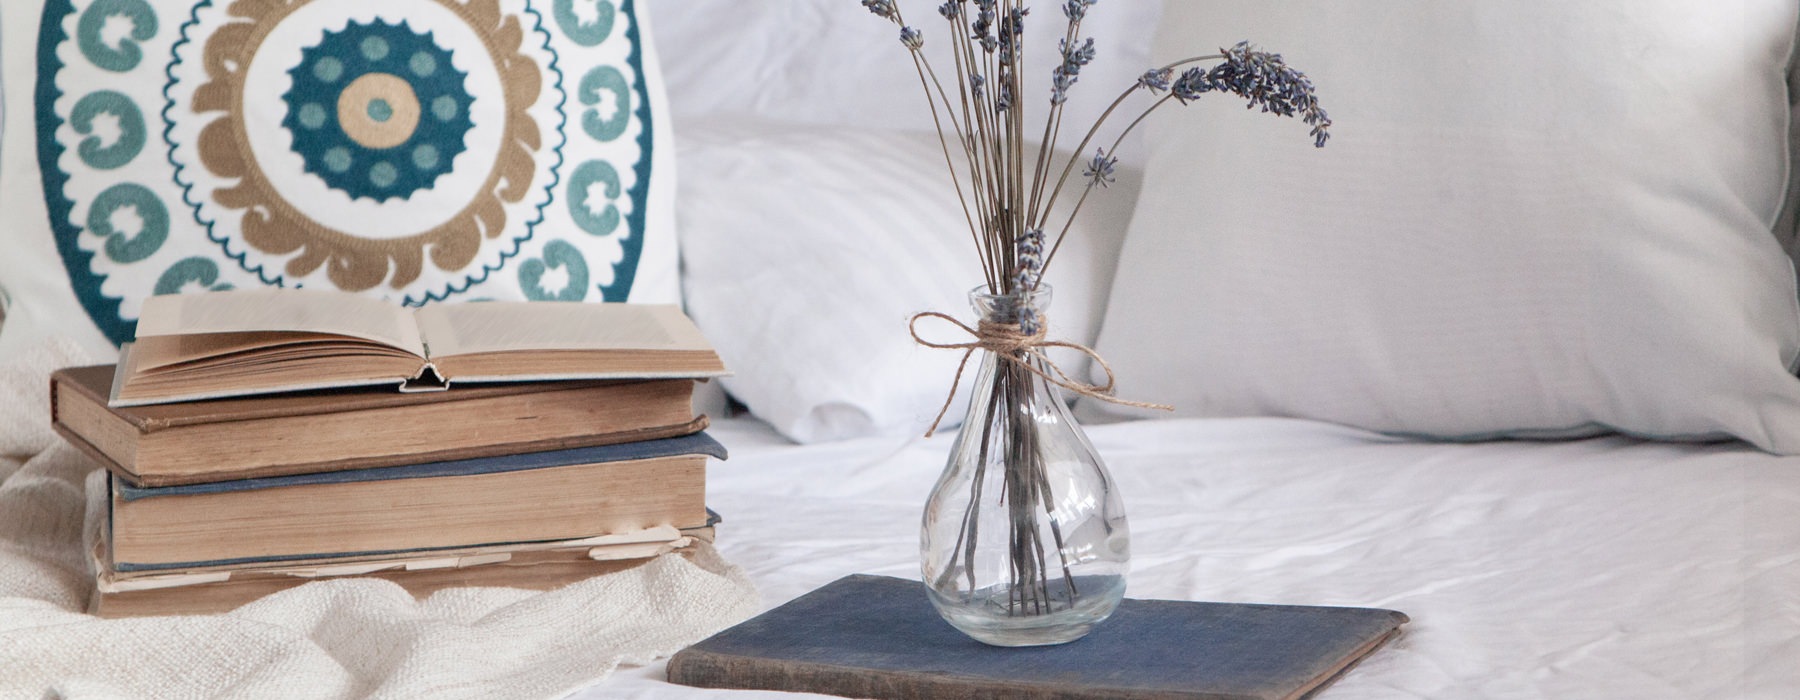 books and vase with flowers on bed